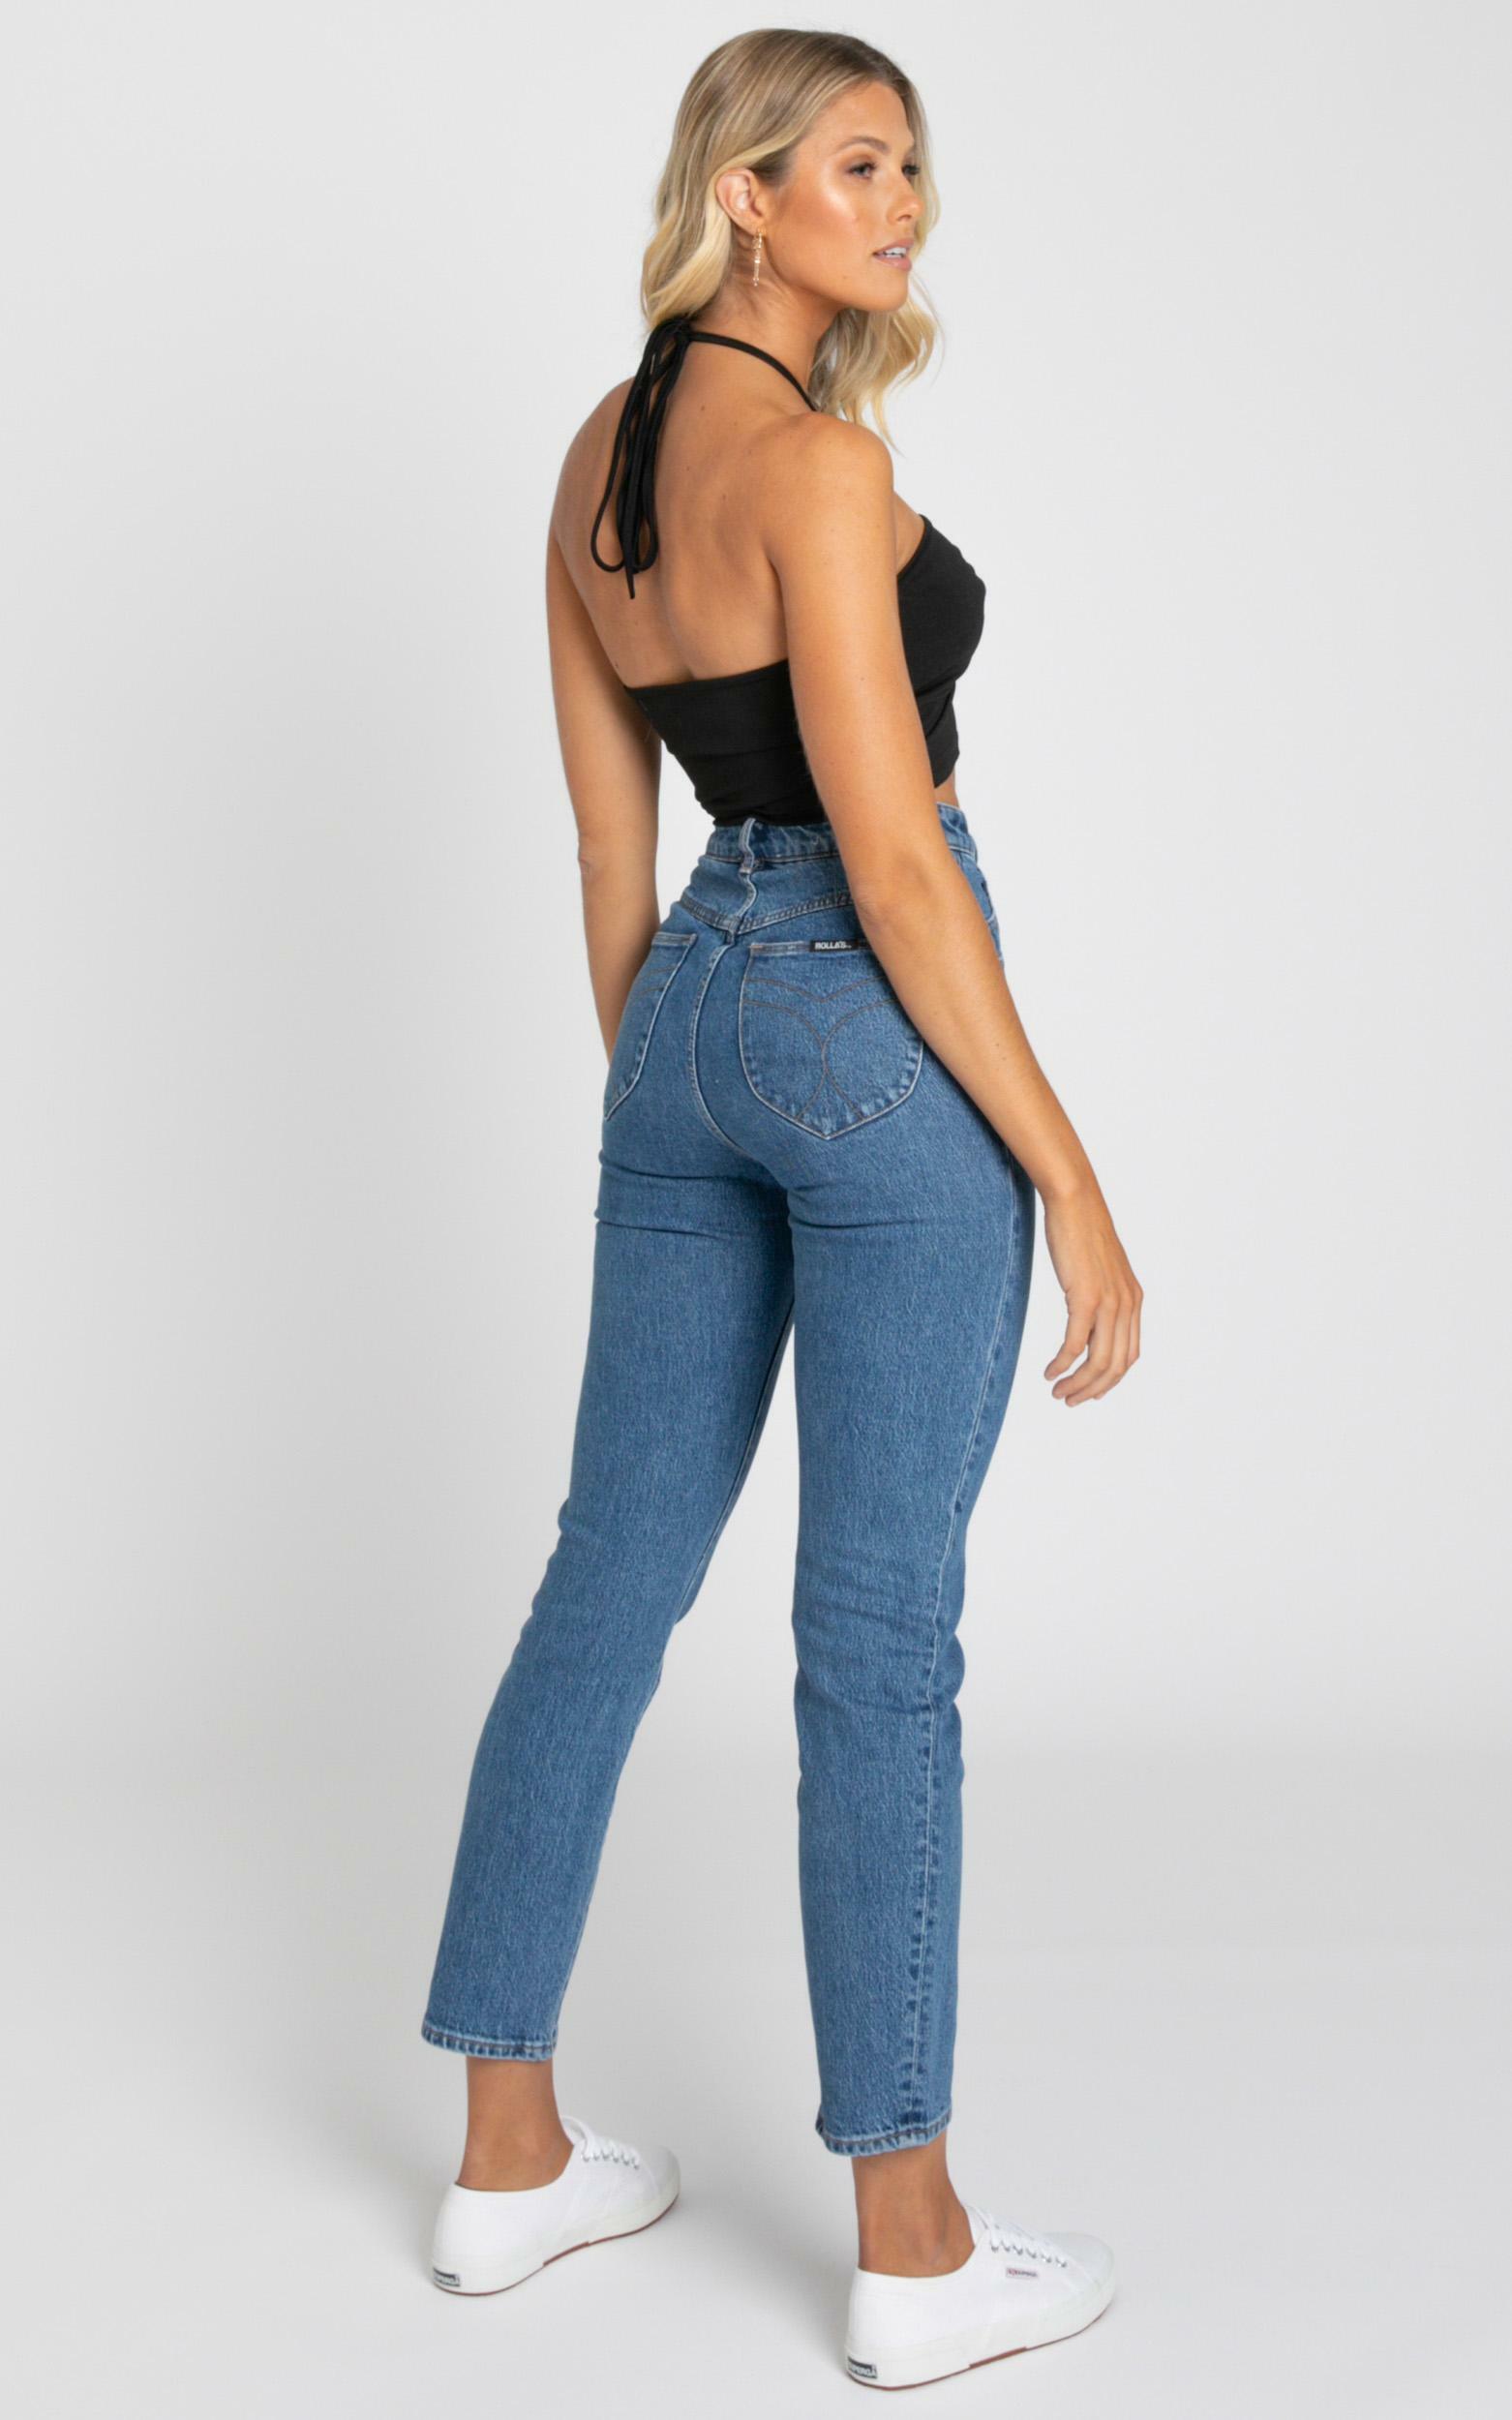 duster blue jeans price